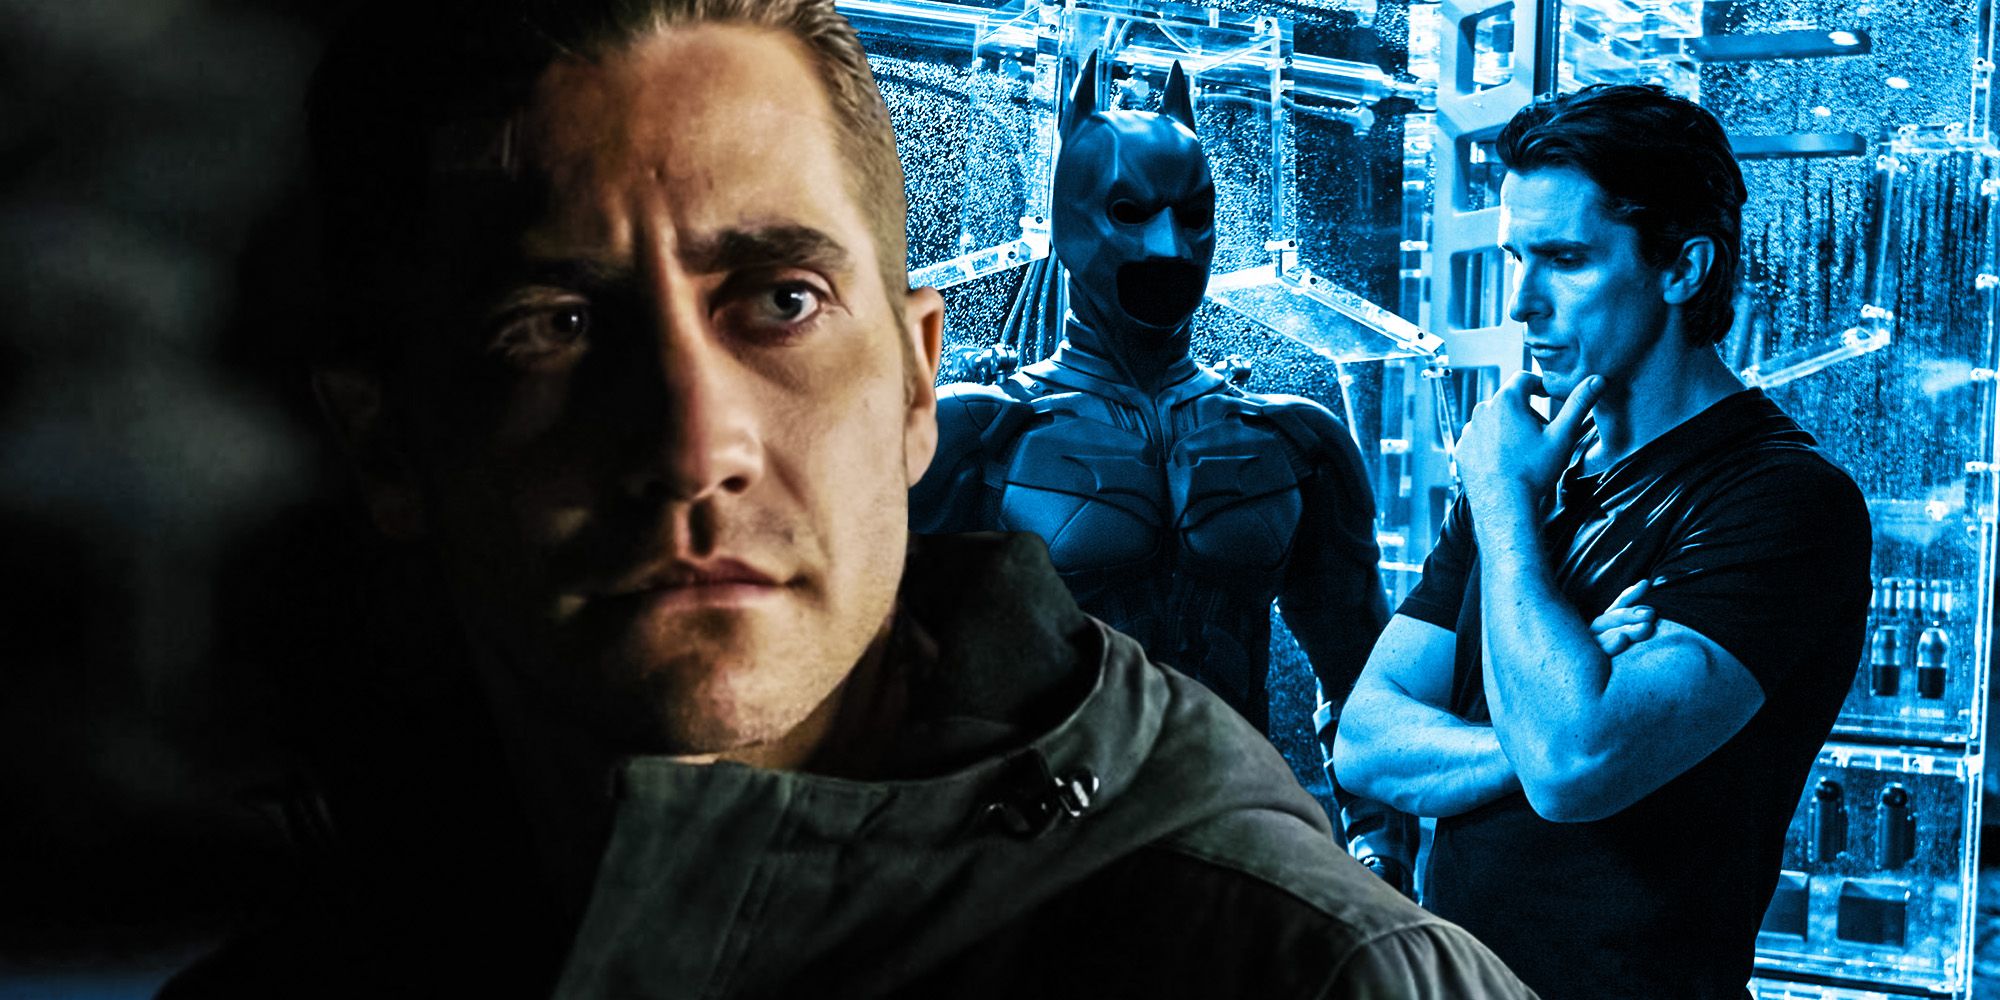 What if Jake Gyllenhaal played Batman in the Dark Knight trilogy?